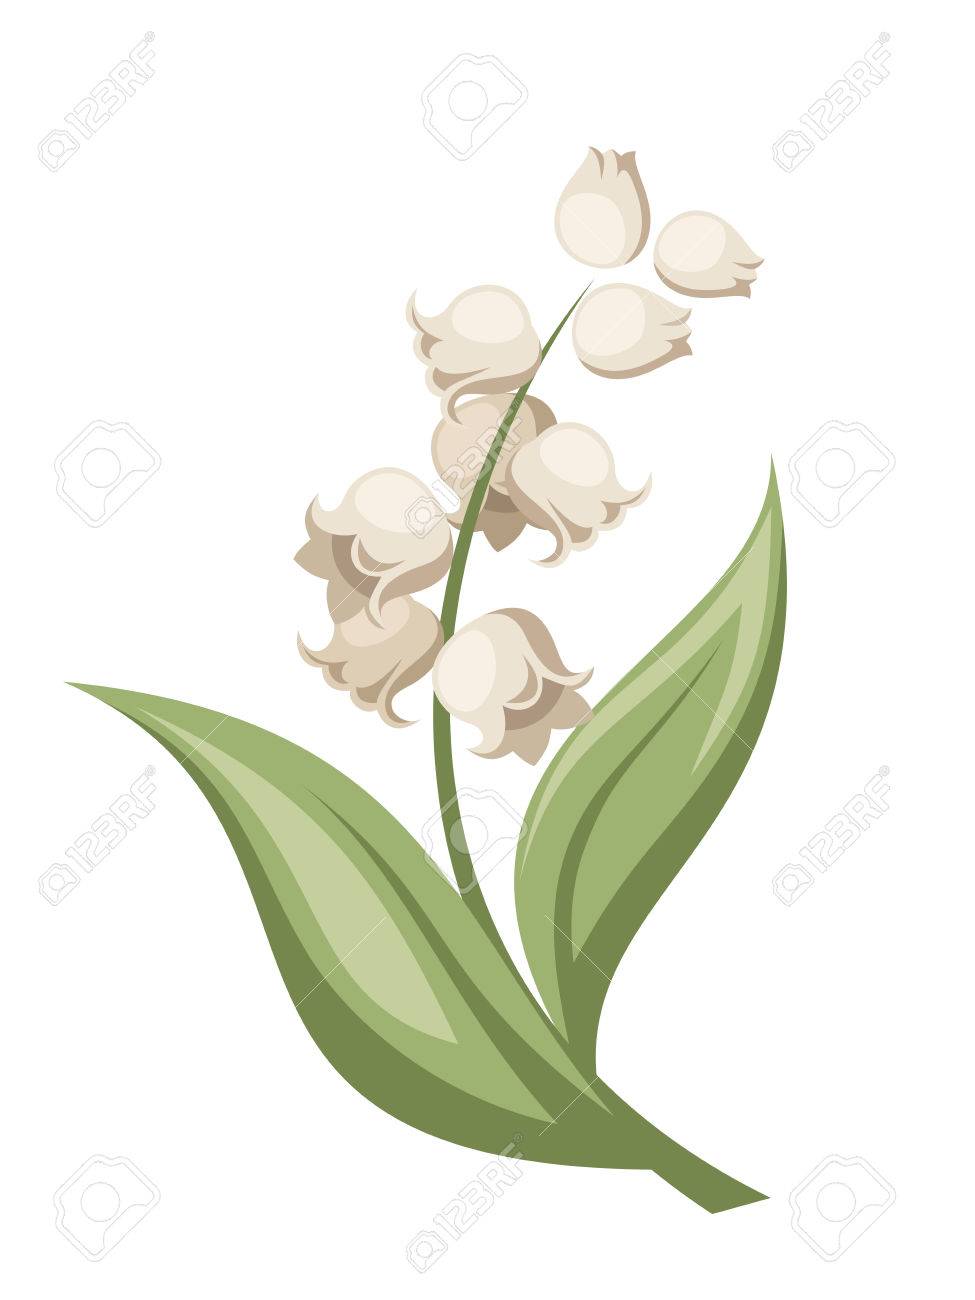 Lily of the valley flower Vector illustration Stok Fotoğraf - 27333211